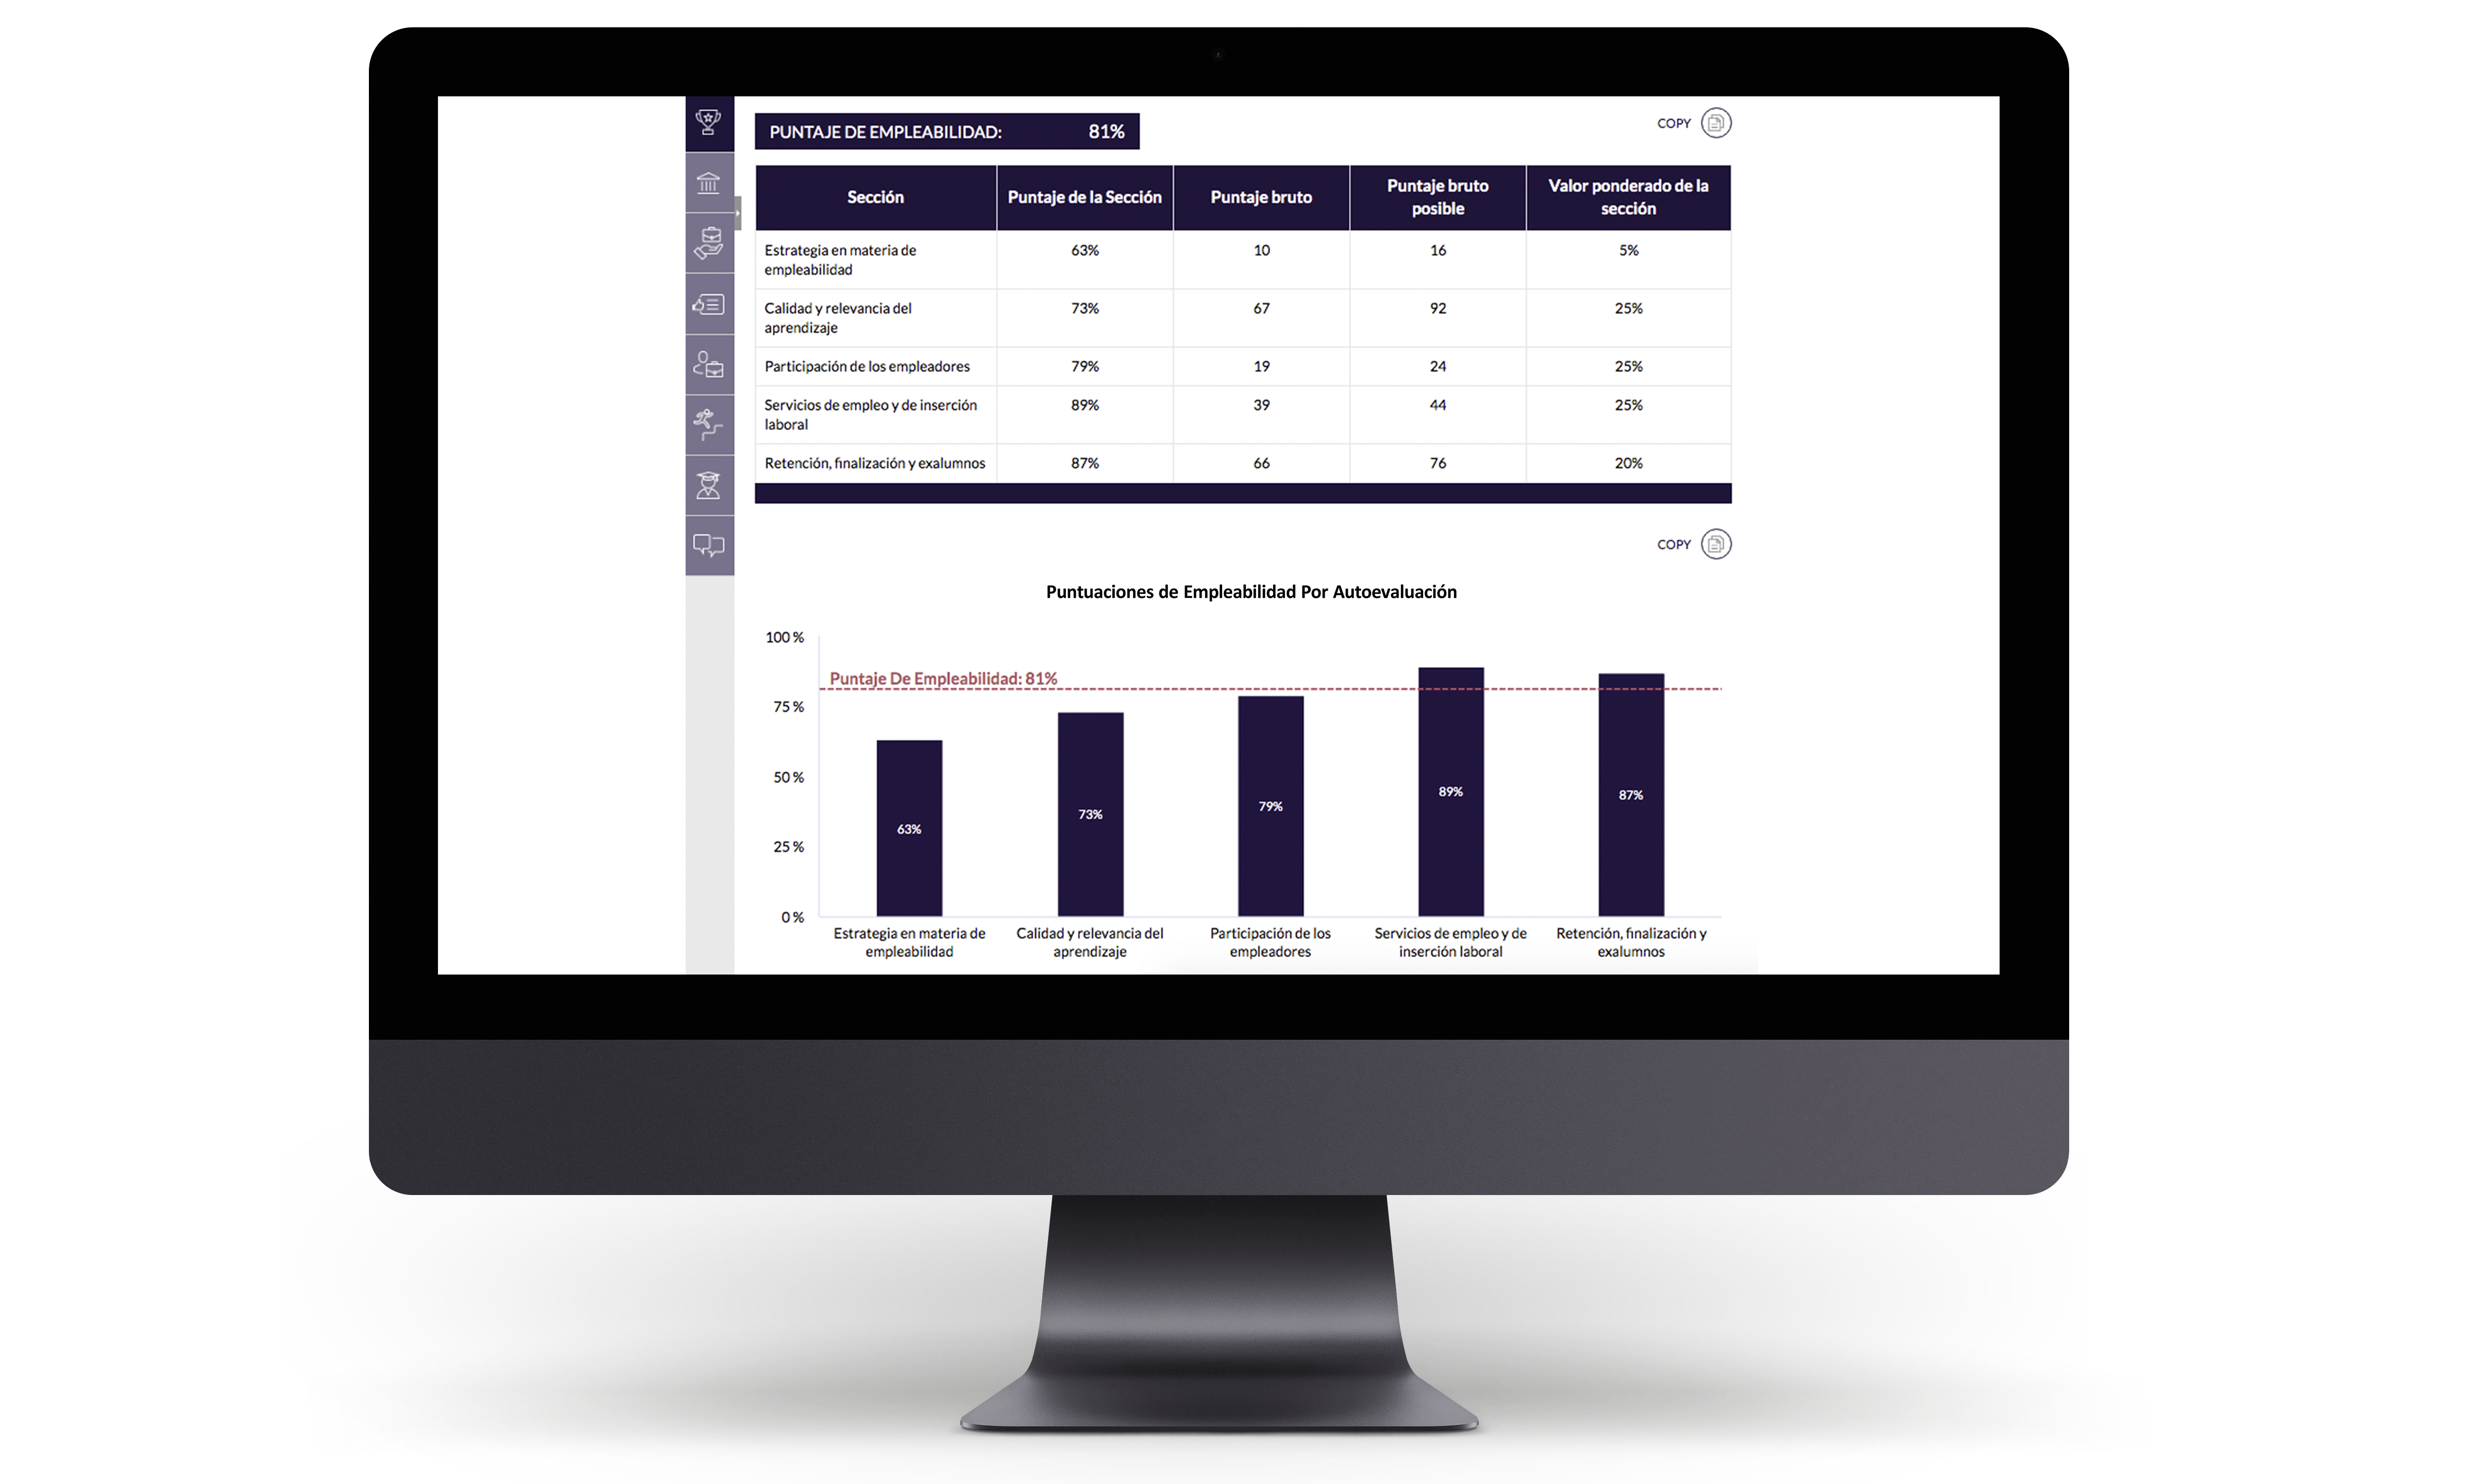 Vitae offers a one-stop shop web application for self-assessment and data gathering for student and alumni surveys.